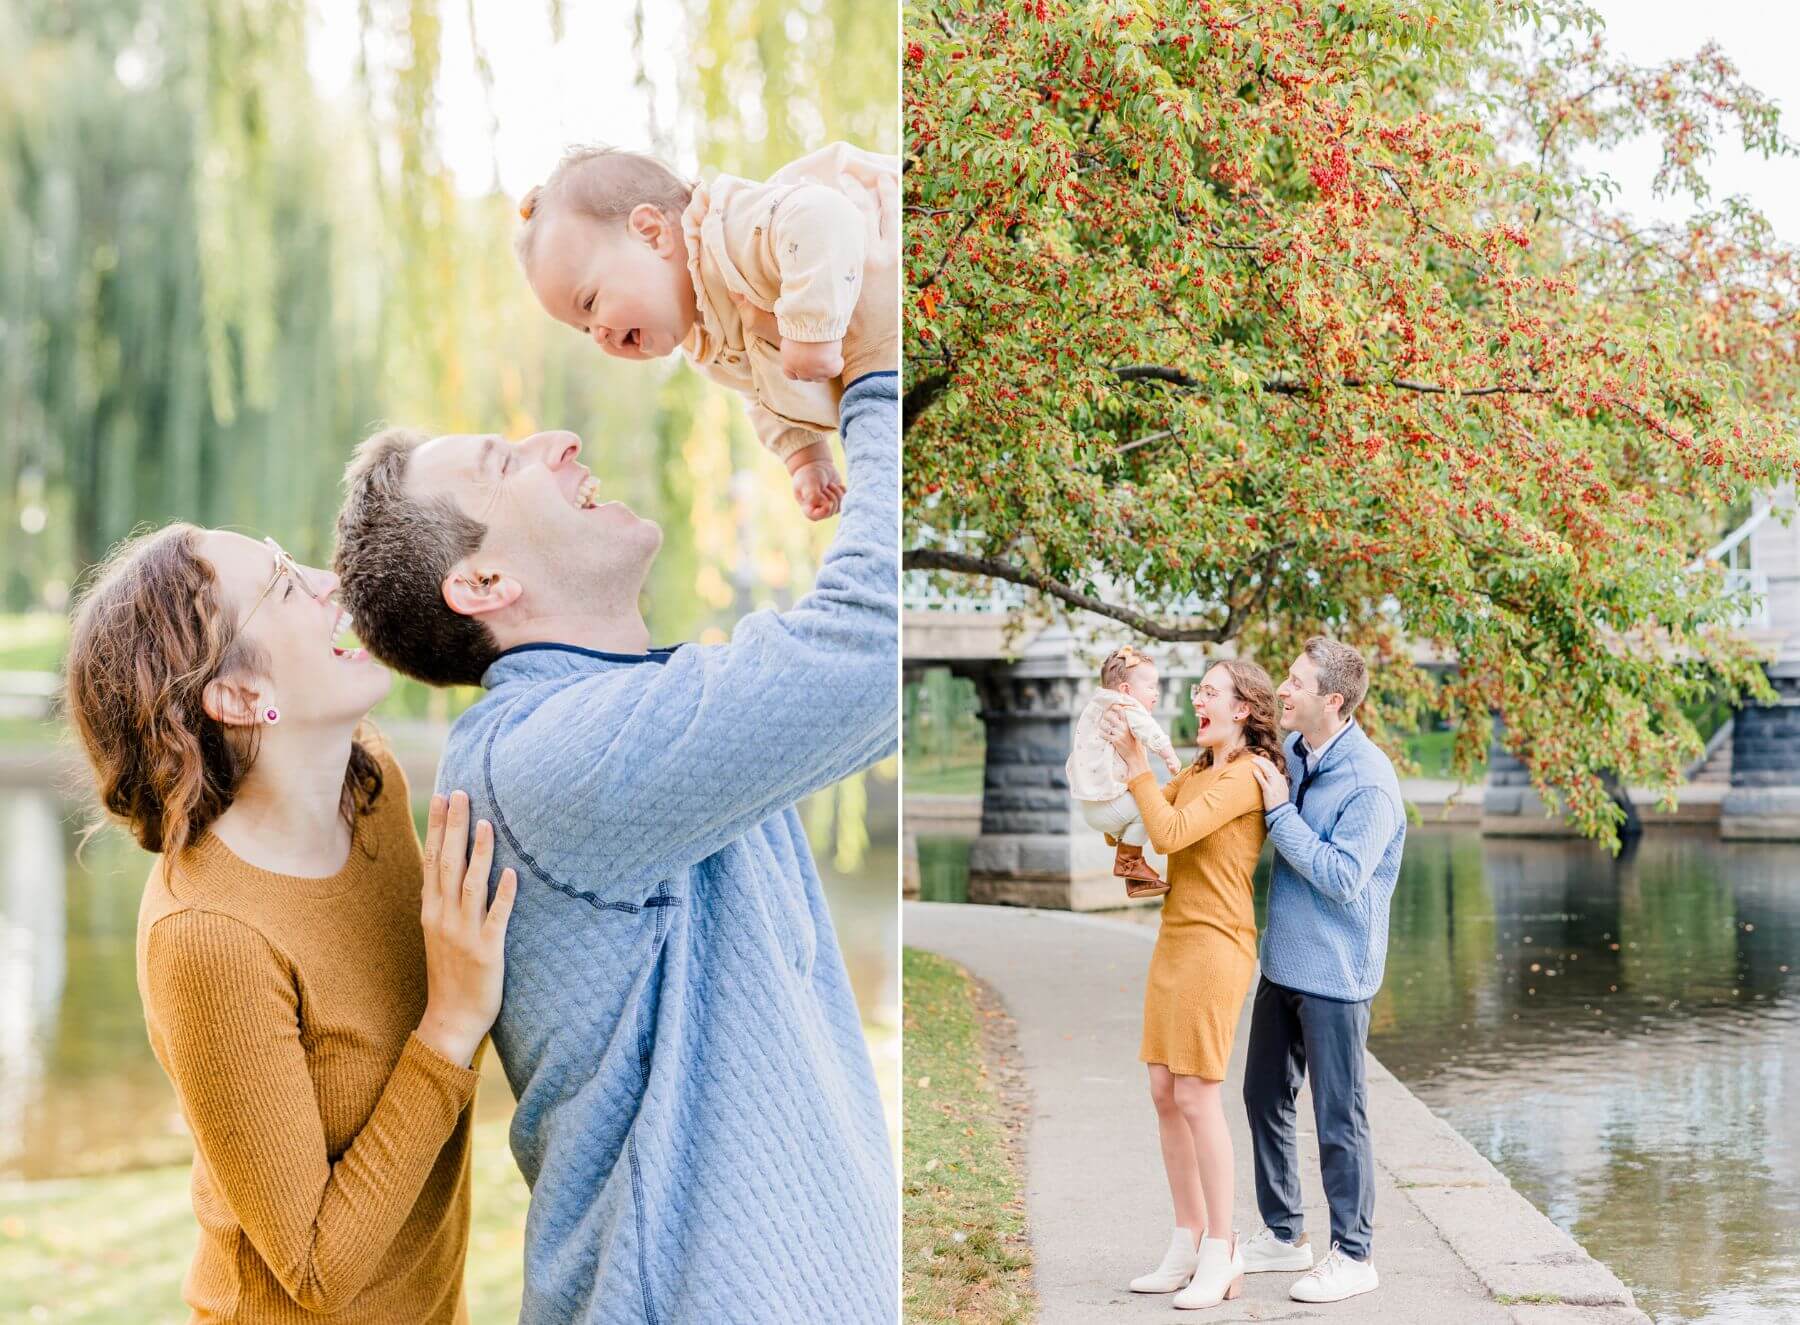 Mom and dad hold up and play with their toddler daughter along a river in a park